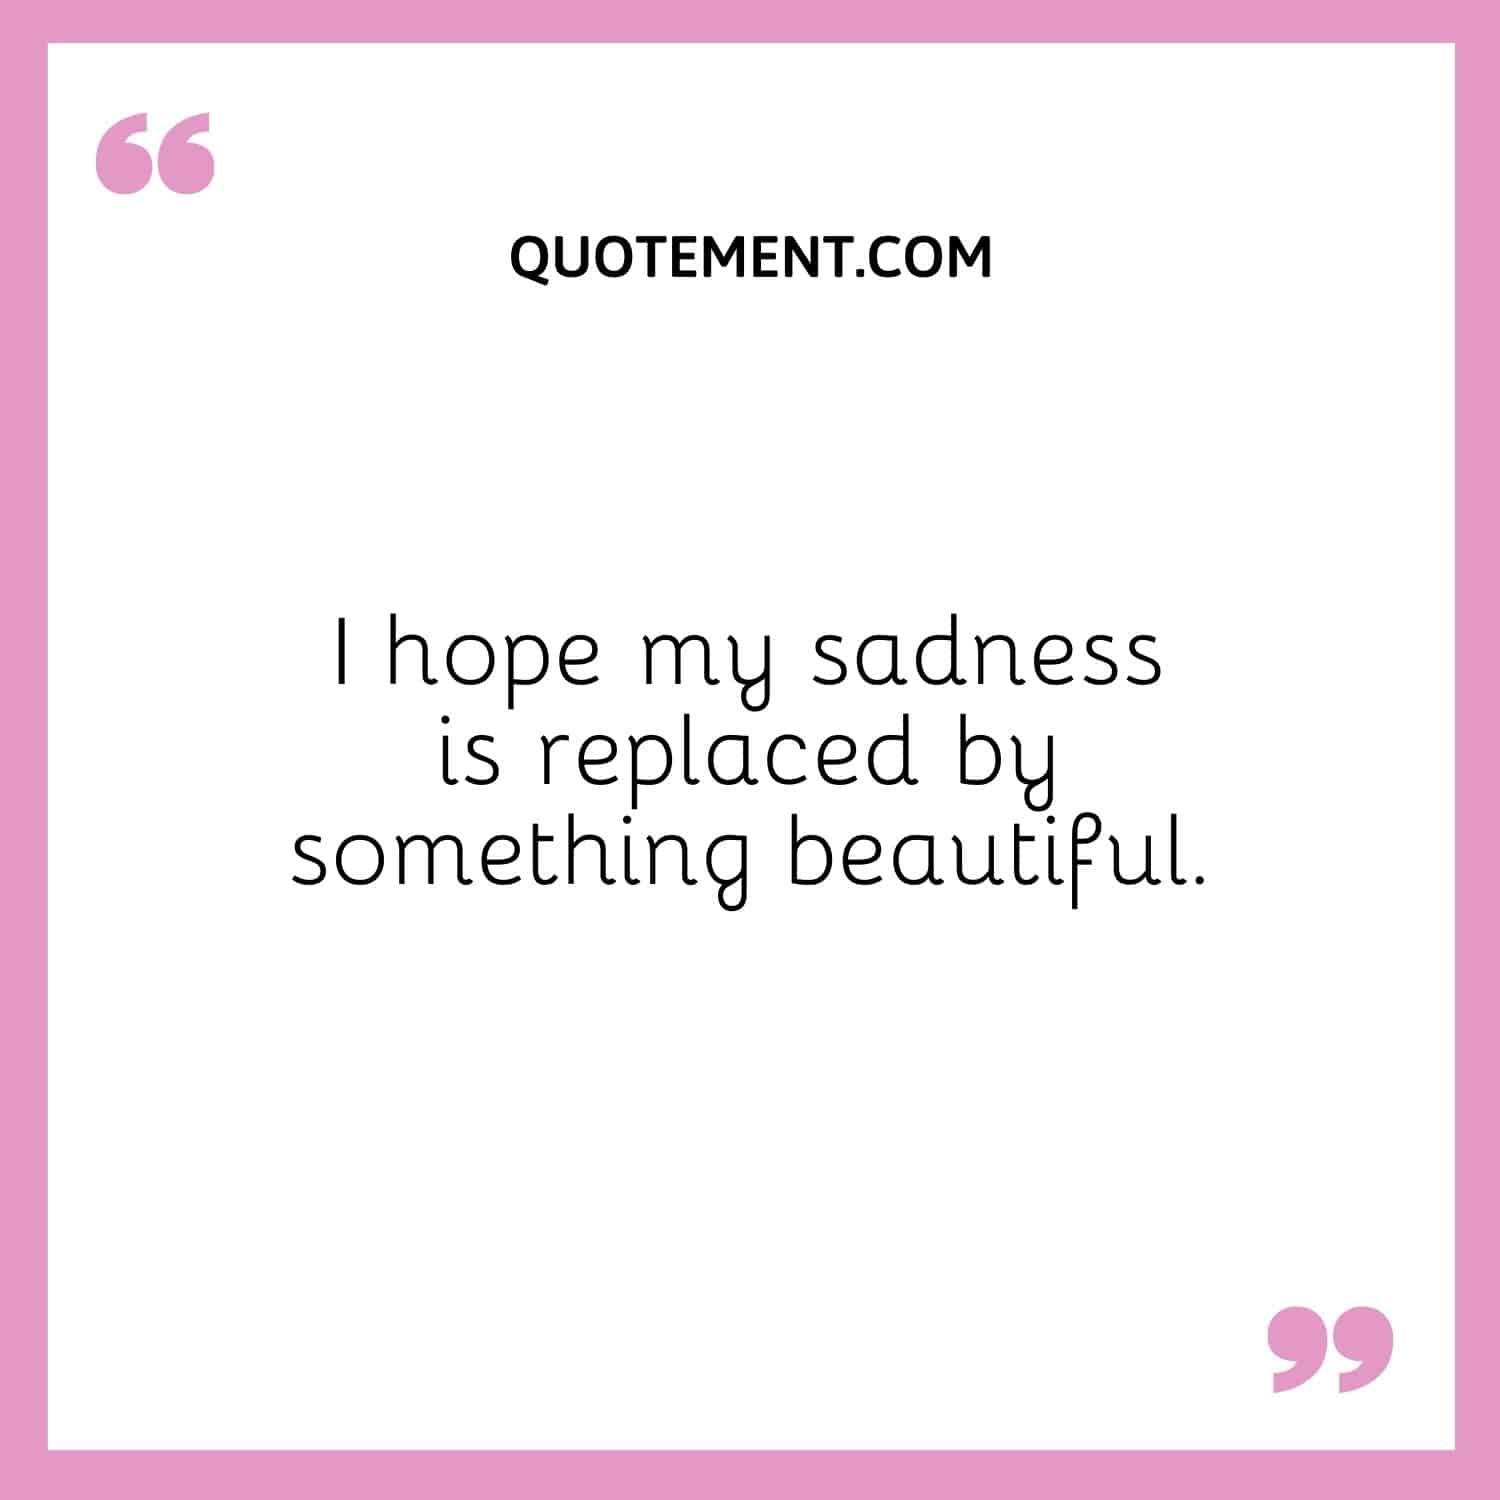 I hope my sadness is replaced by something beautiful.